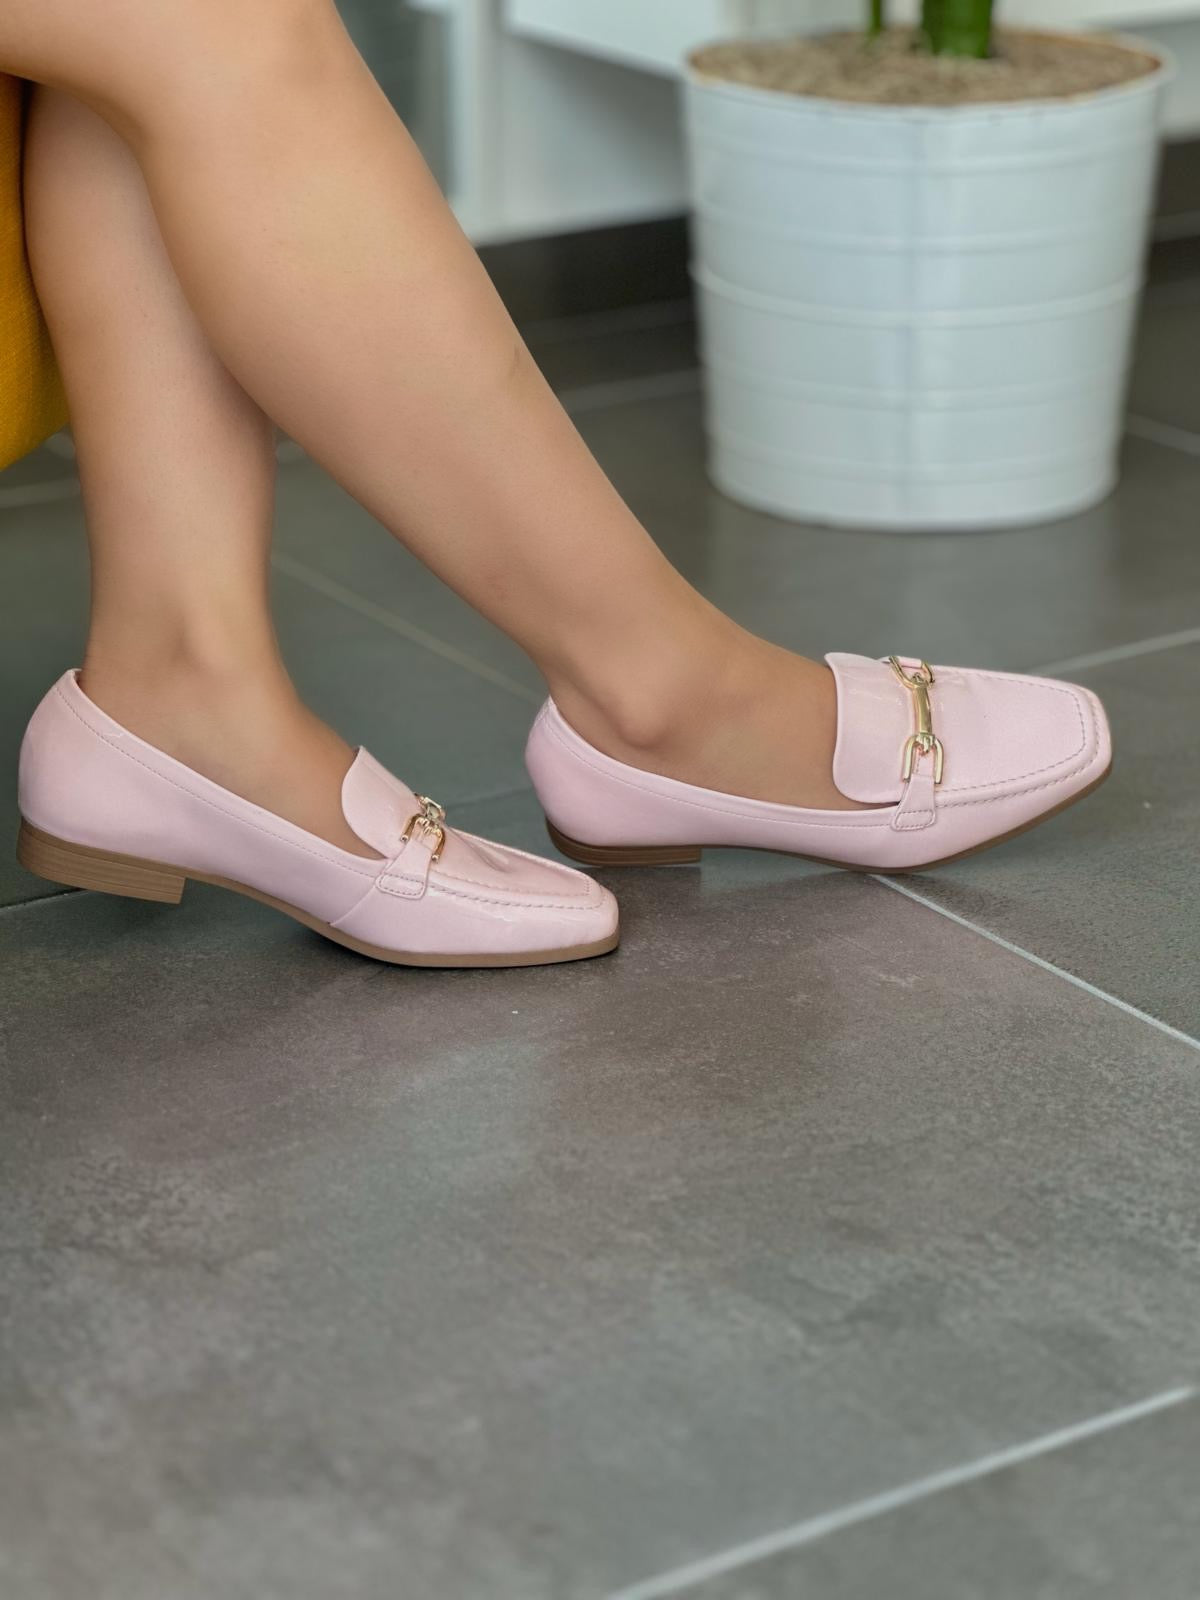 Patent  Leather  Pink  Flat Shoe 3161-07